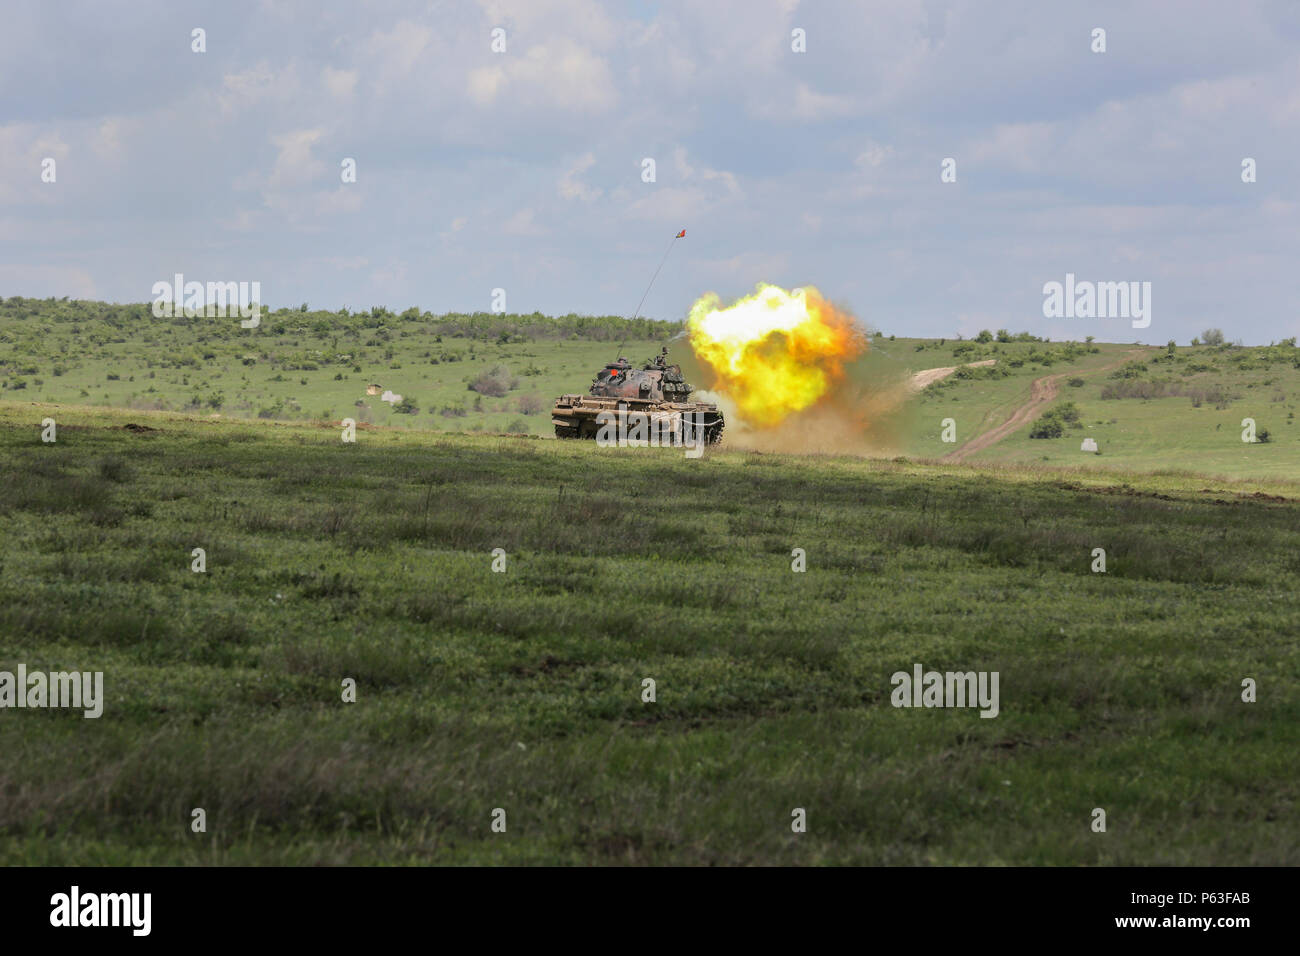 A Romanian T-55 Tank sends a blast downrange as it takes part in a live-fire exercise during Platinum Lynx 16-4 aboard Babadag Training Area, Romania, April 21, 2016. The purpose behind Platinum Lynx is to improve readiness and increase Marines’ ability to work seamlessly with other NATO and partner nations around the world. (U.S. Marine Corps photo by Cpl. Immanuel M. Johnson/Released) Stock Photo